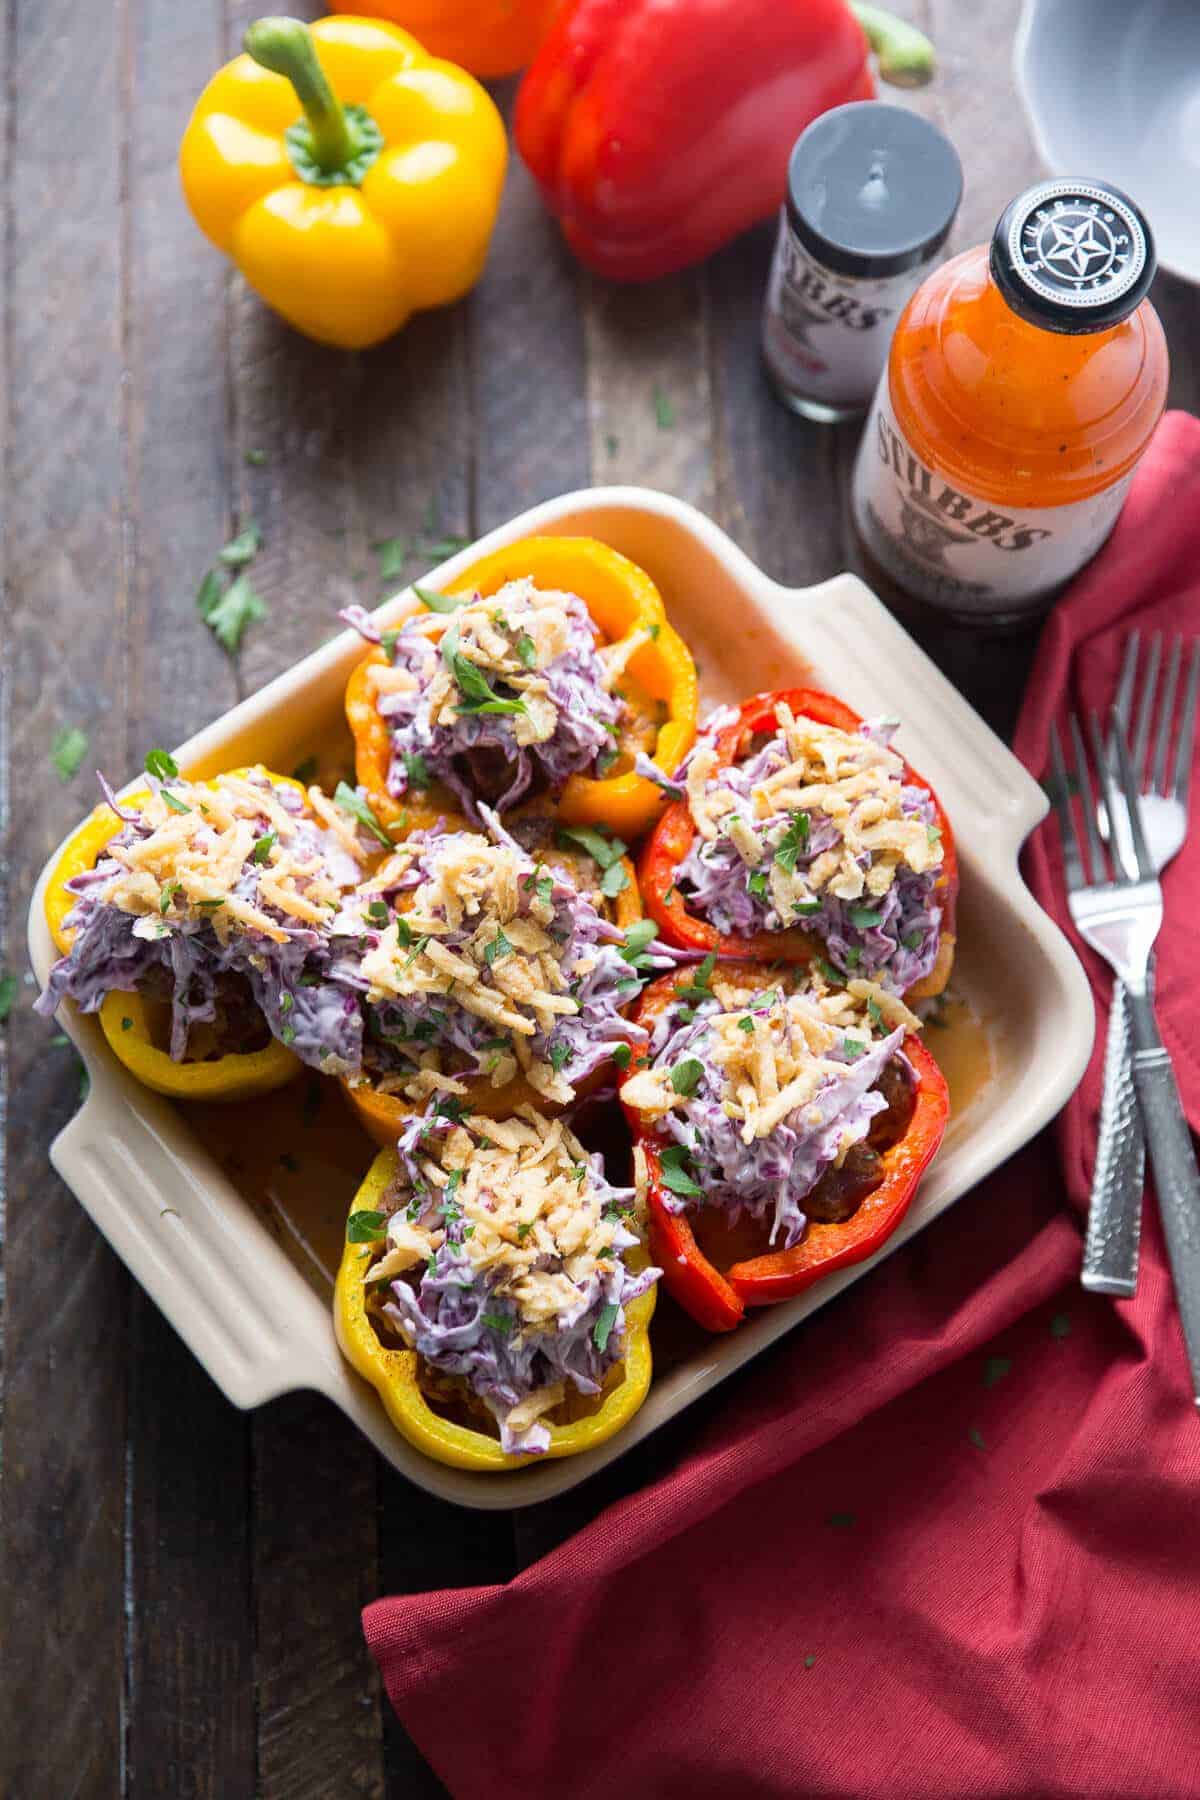 Southwest Stuffed Peppers are filled with brisket and topped with slaw!